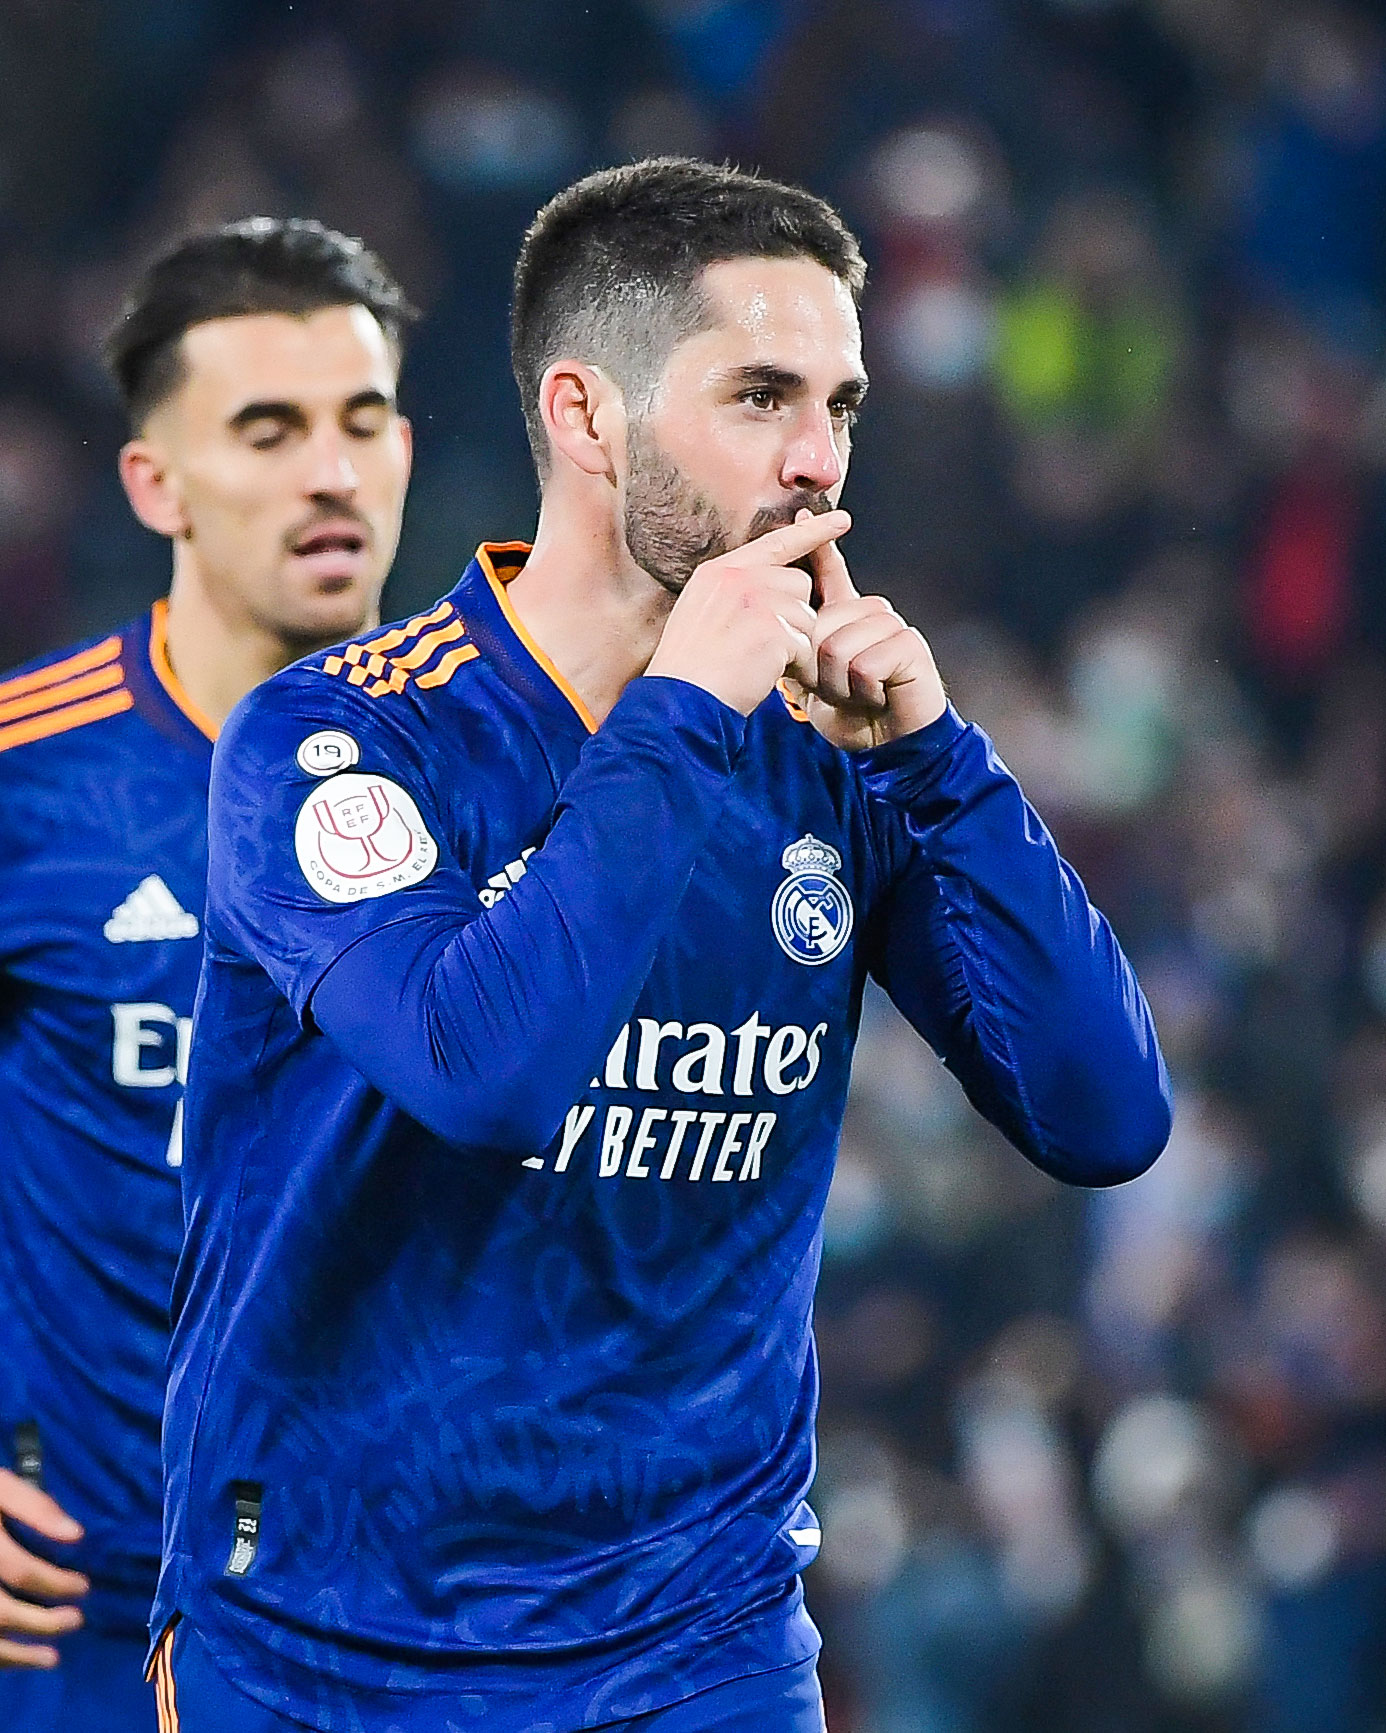 Real Madrid beat Elche: Late goals from Isco and Eden Hazard help 10 man Real Madrid beat Elche 2-1 in extra-time of the Copa Del Rey